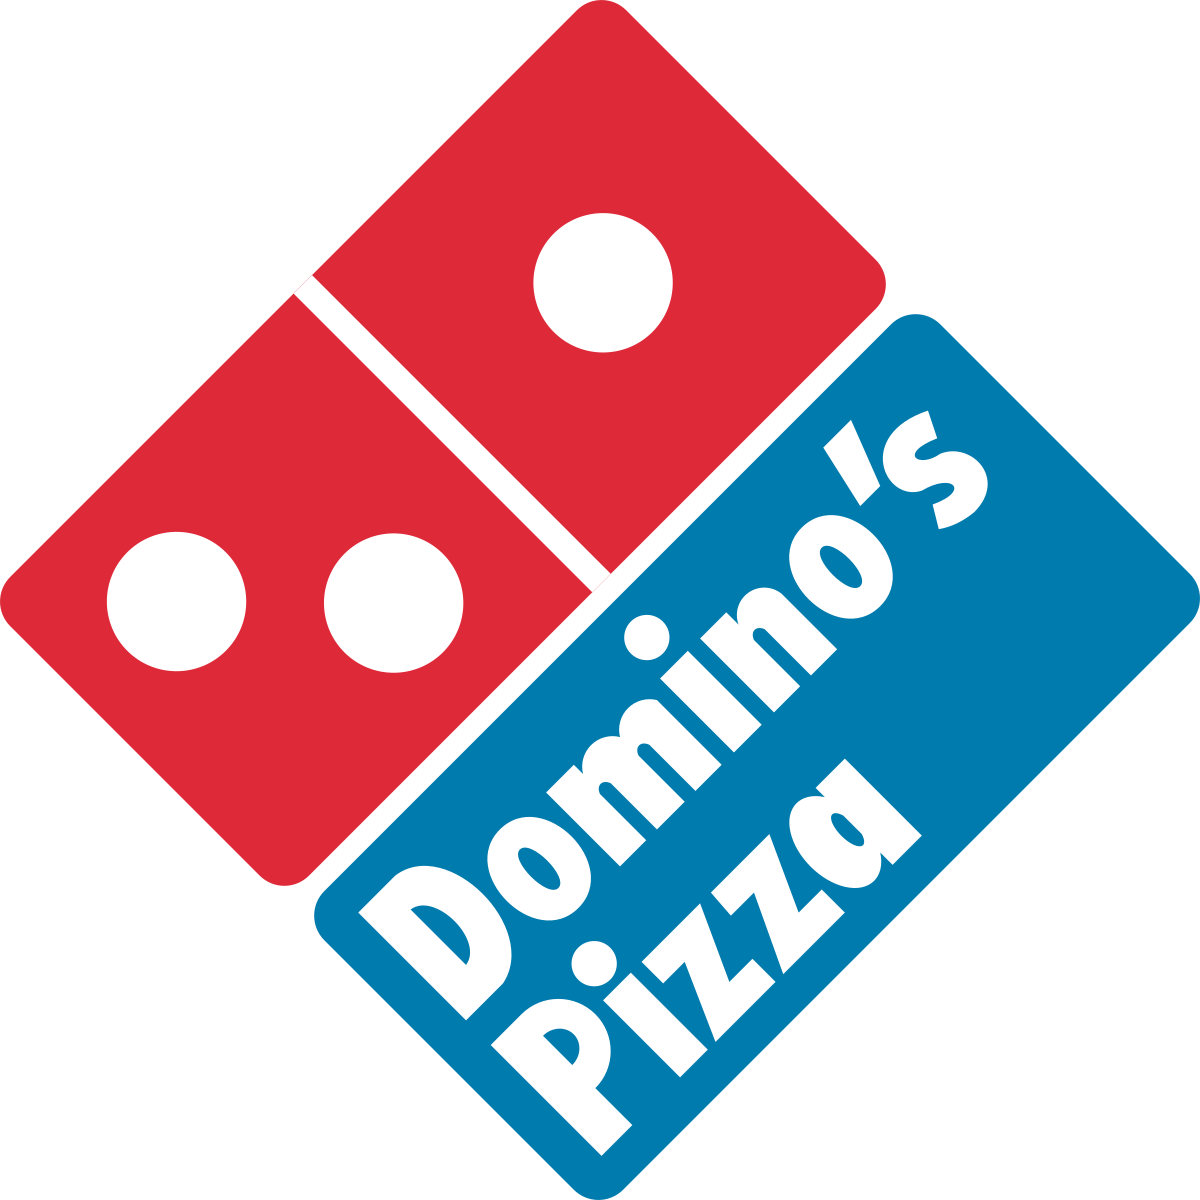 Domino’s Pizza Malaysia set to join largest international Domino’s group